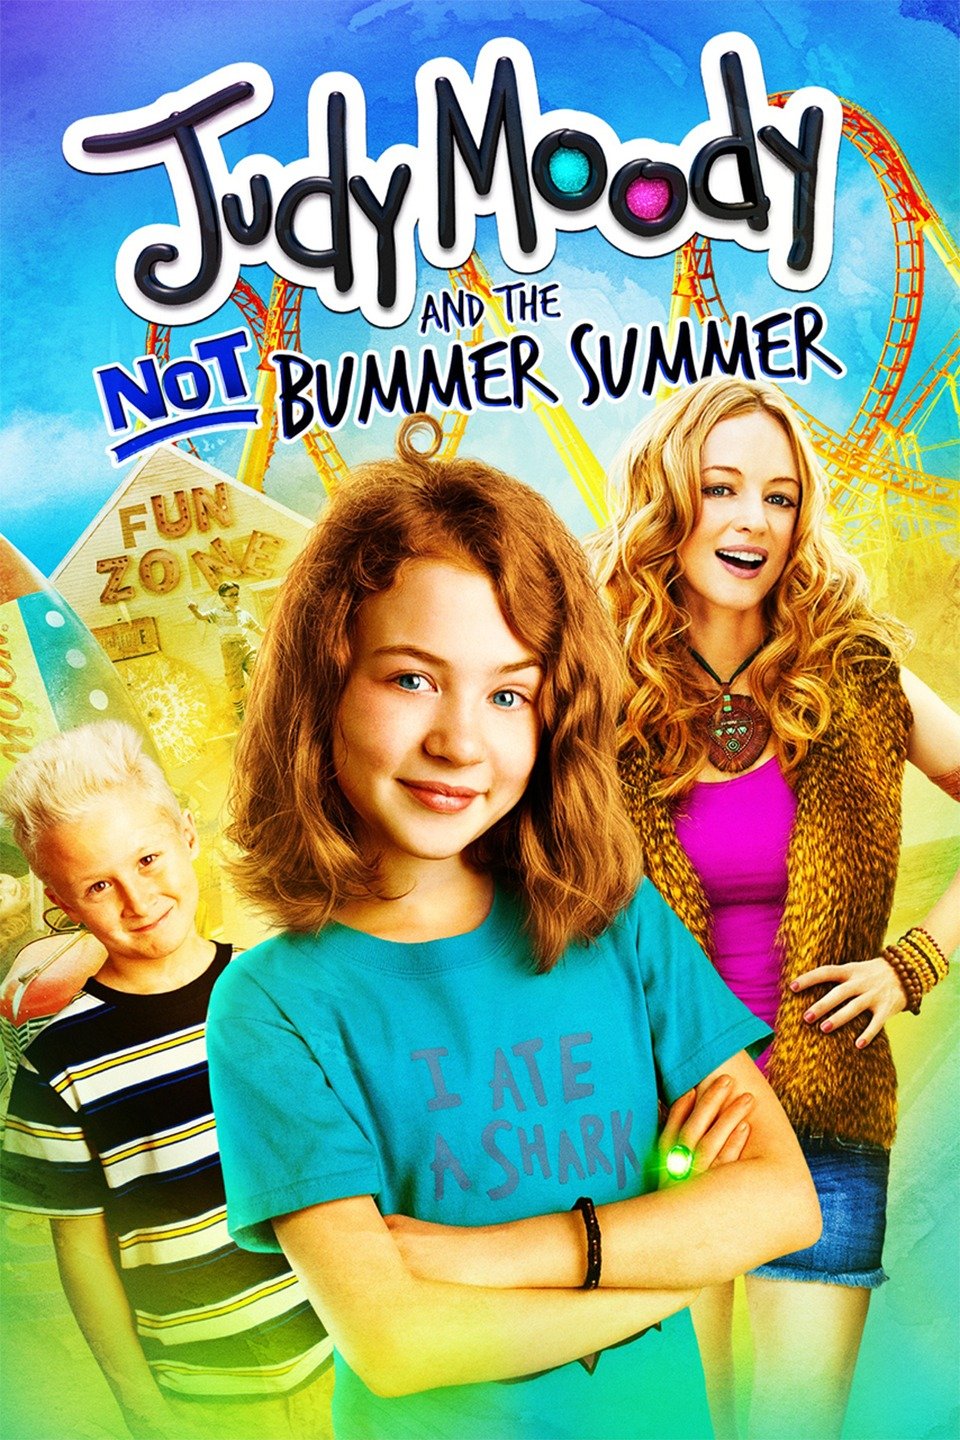 Judy moody and the not bummer summer